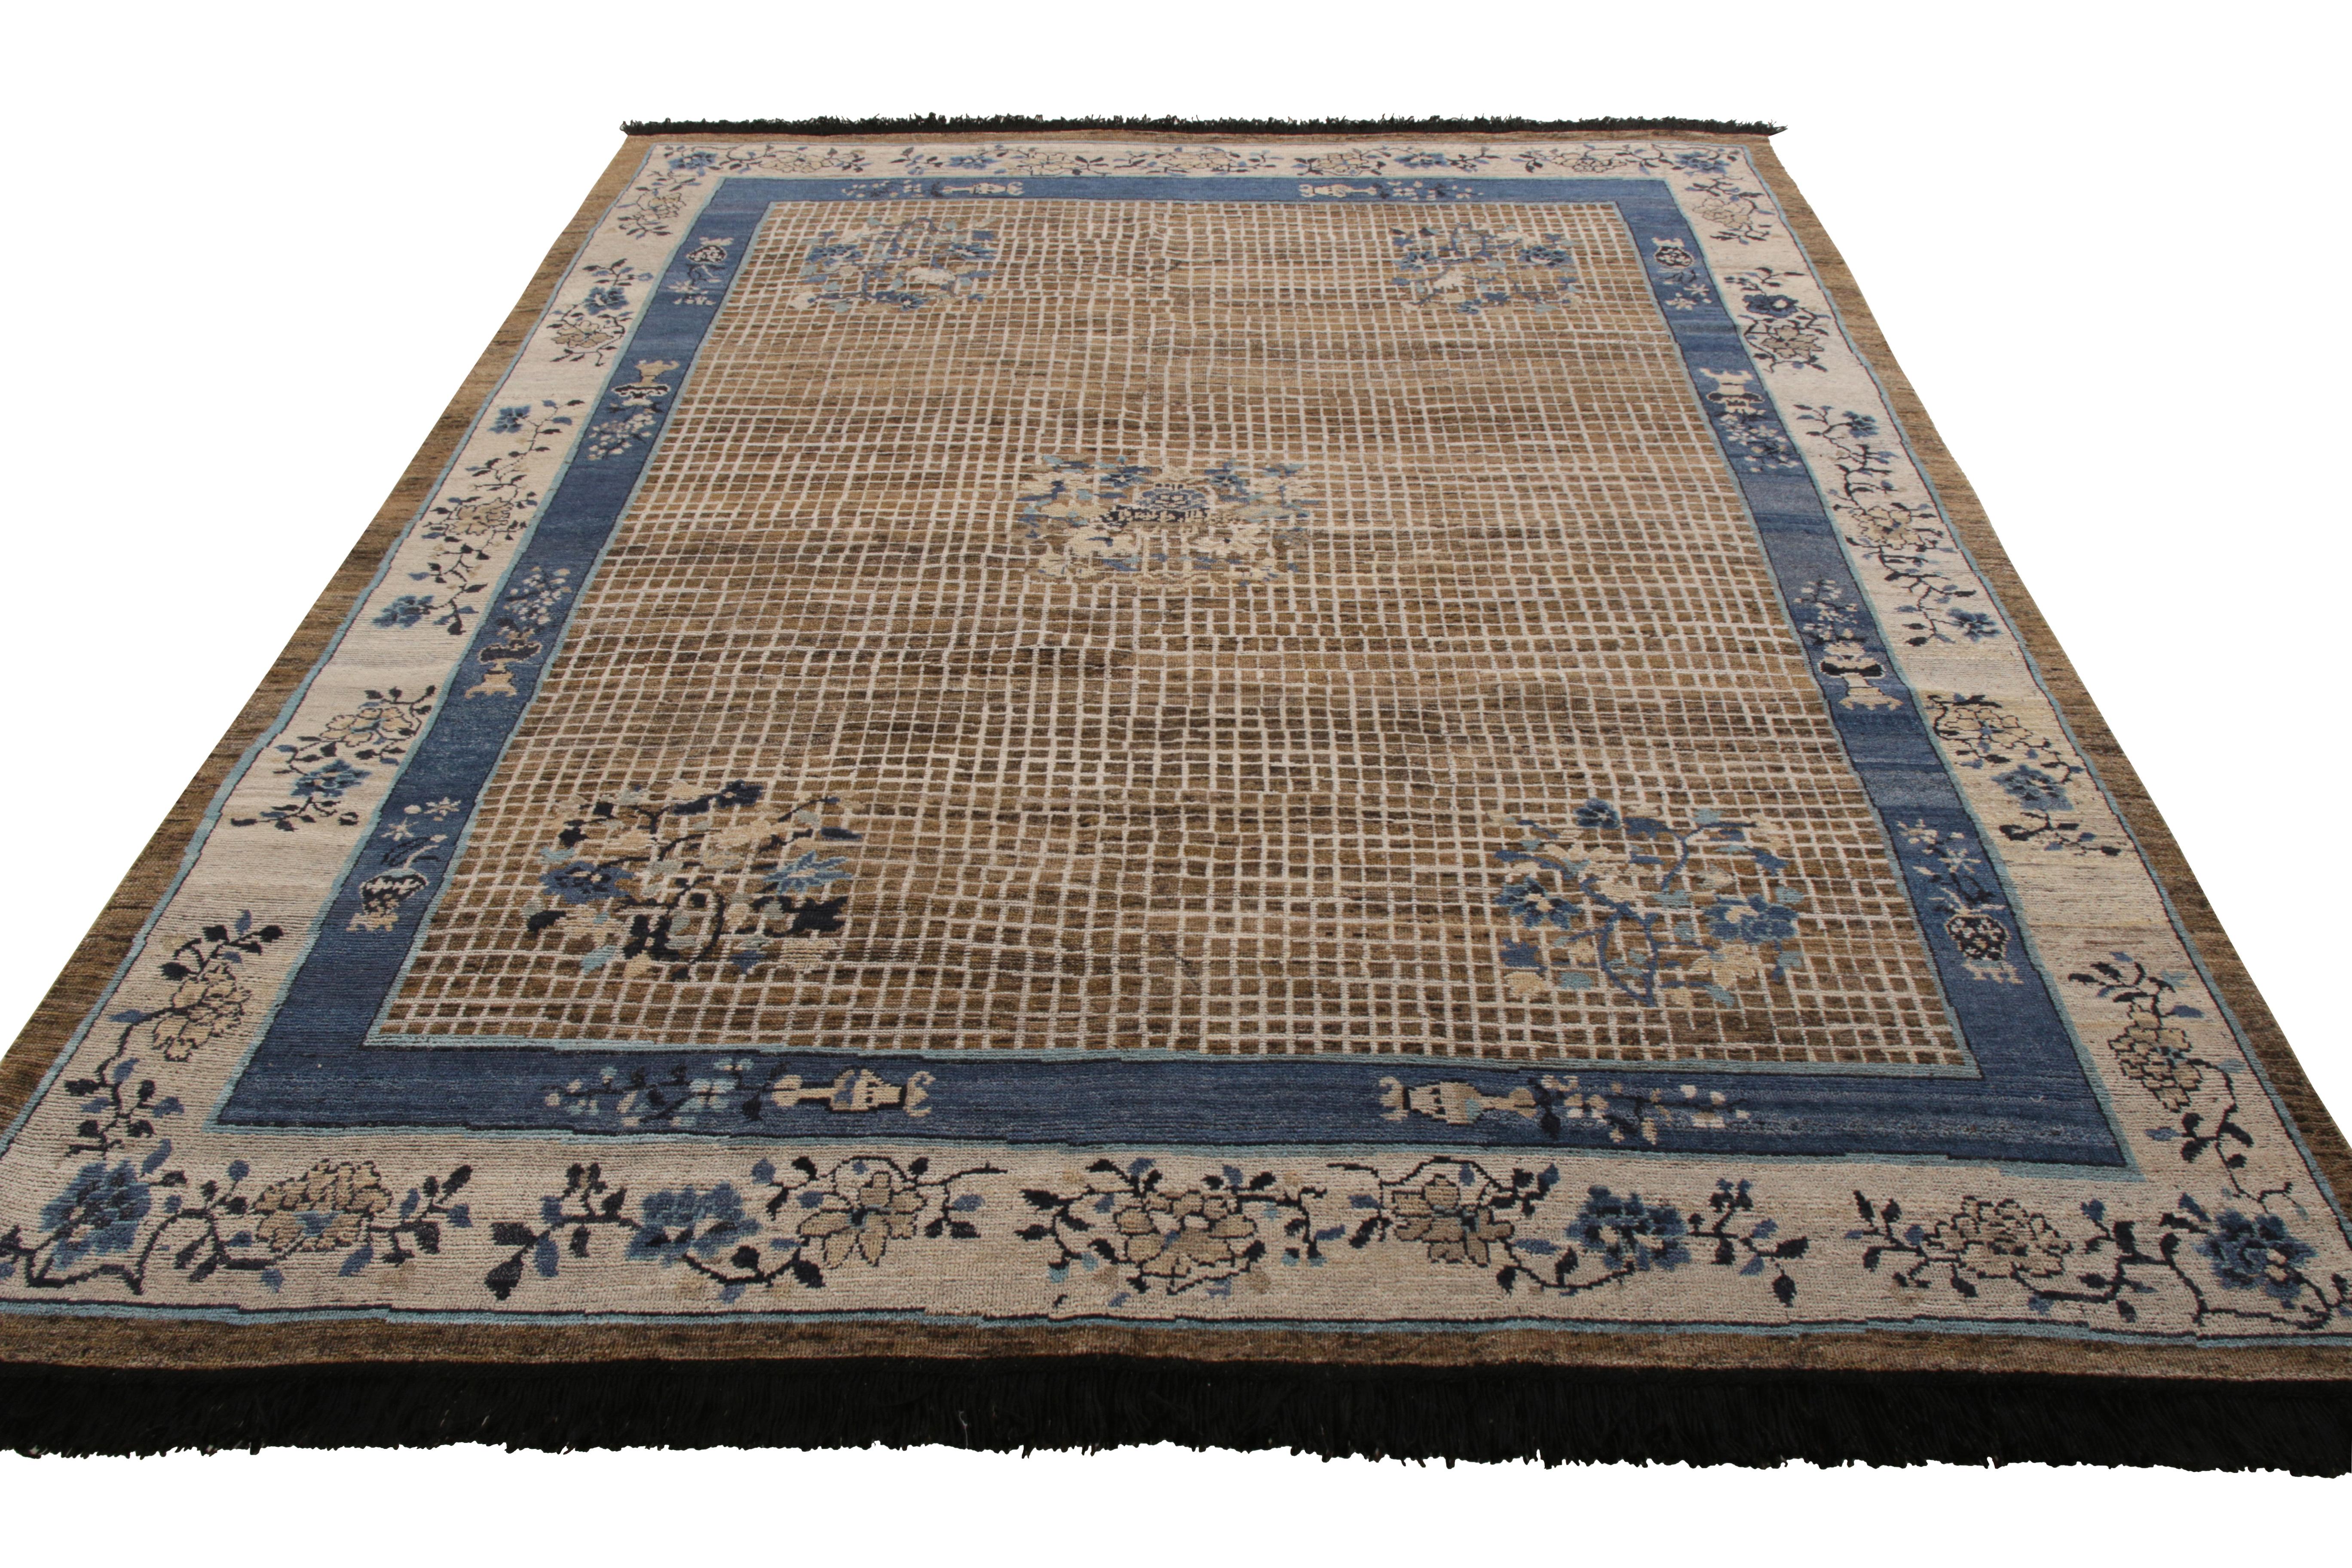 An 8x10 ode to celebrated Chinese Art Deco rug styles, from Rug & Kilim’s Burano Collection. Hand knotted in wool, enjoying a sophisticated beige-brown and blue play complementing elegant medallion floral patterns. Exemplary in scale, subtle